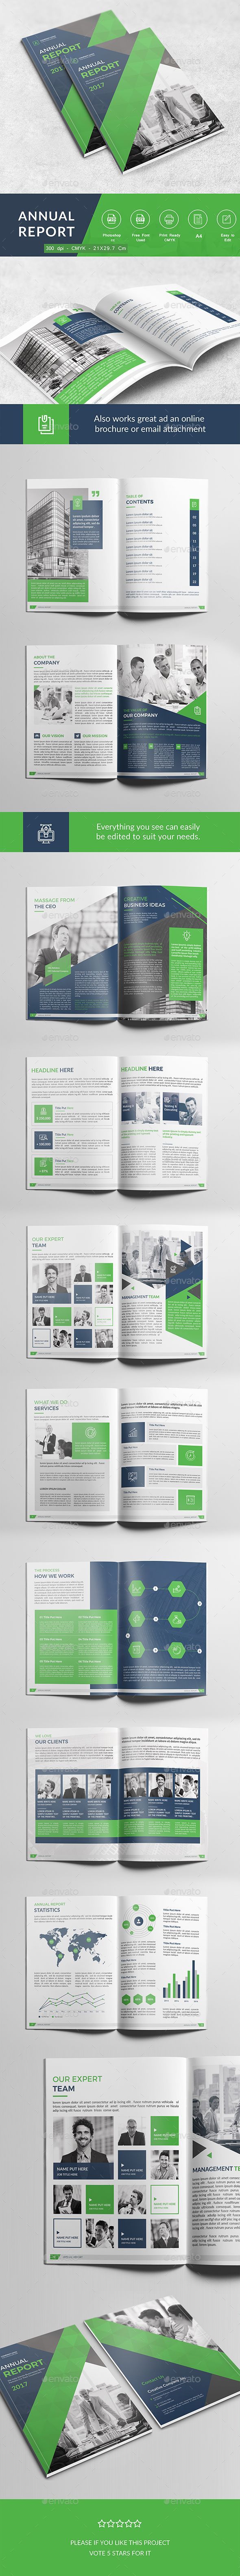 Download Business Infographic Business Infographic Annual Report Psd Template Summary Corporate Downloa Infographicnow Com Your Number One Source For Daily Infographics Visual Creativity